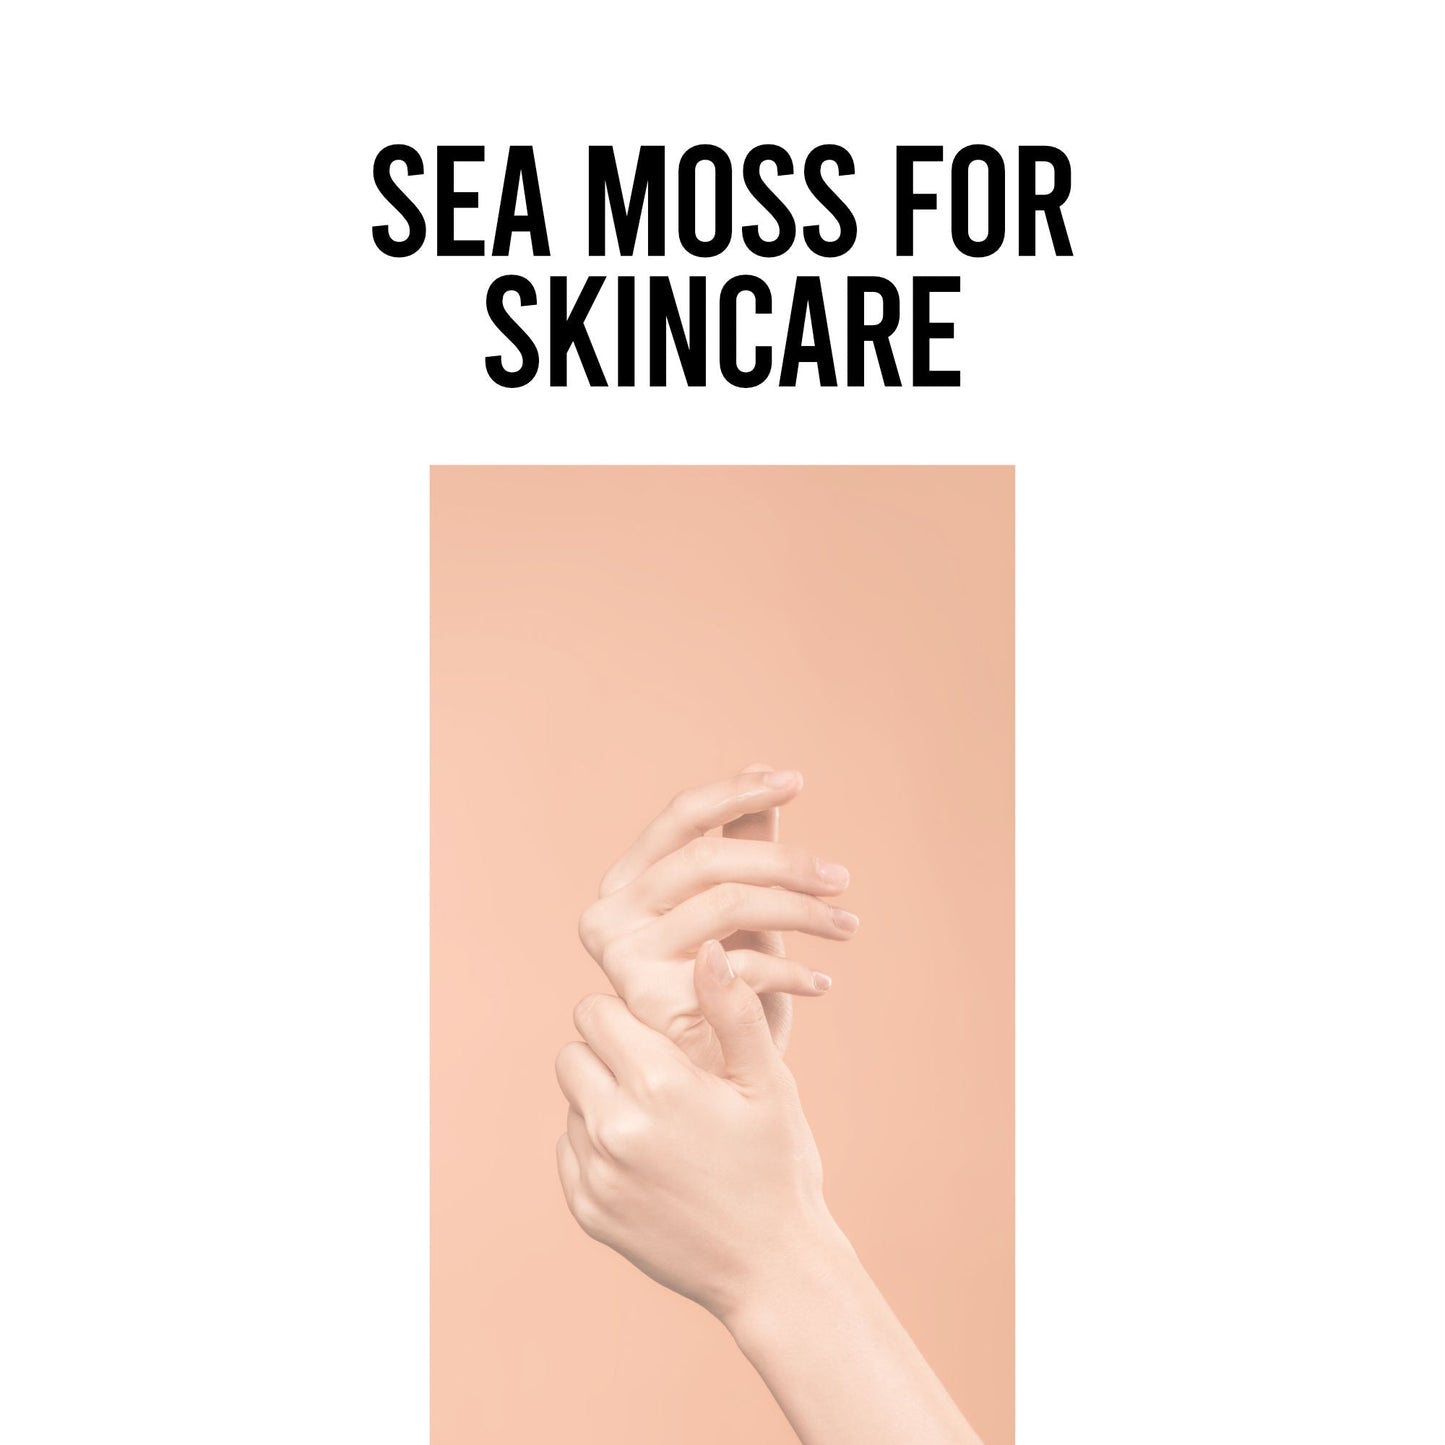 Sea Moss can be used as a skincare product. Add a small amount to skin and leave for 10-15min and rinse with warm water